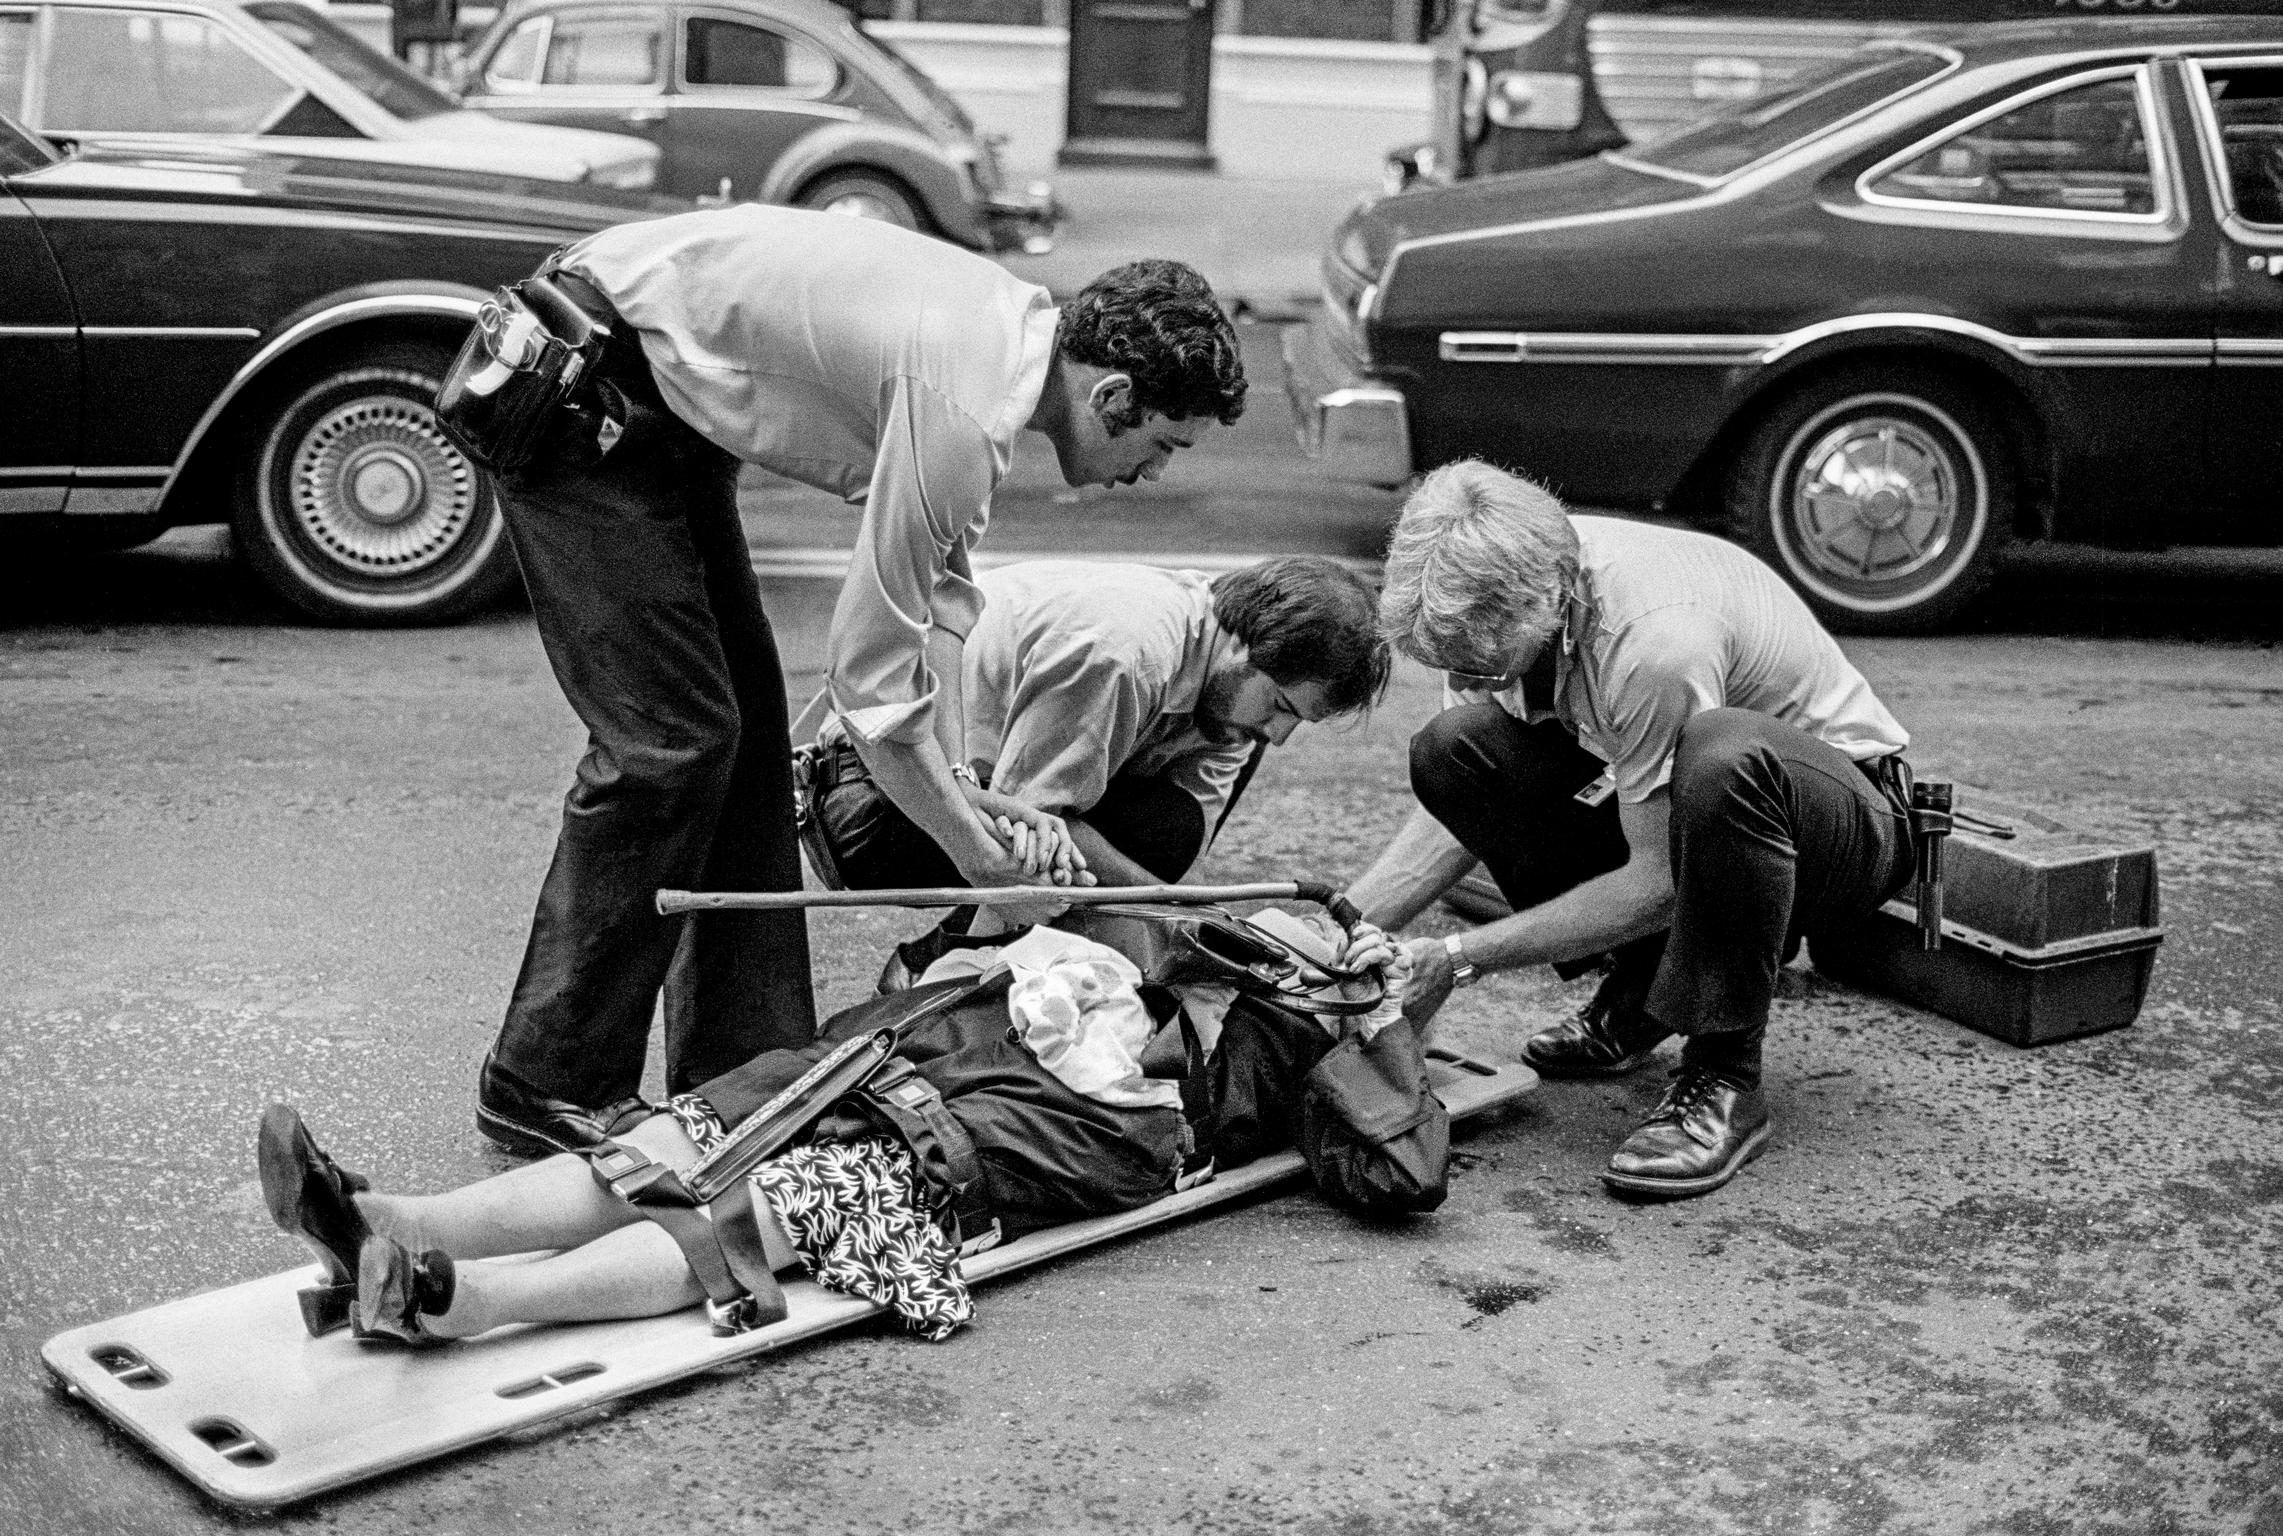 Street casualty. Accident or simply a fall. Ambulance personnel oversee. New York, USA